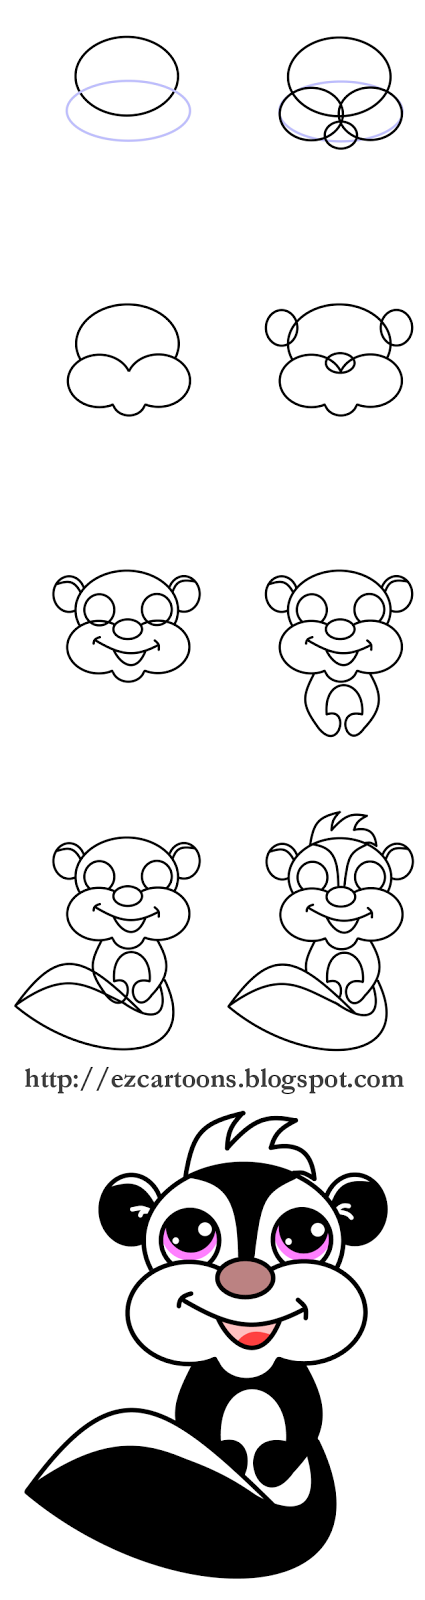 Easy To Draw Cartoons How To Draw A Skunk